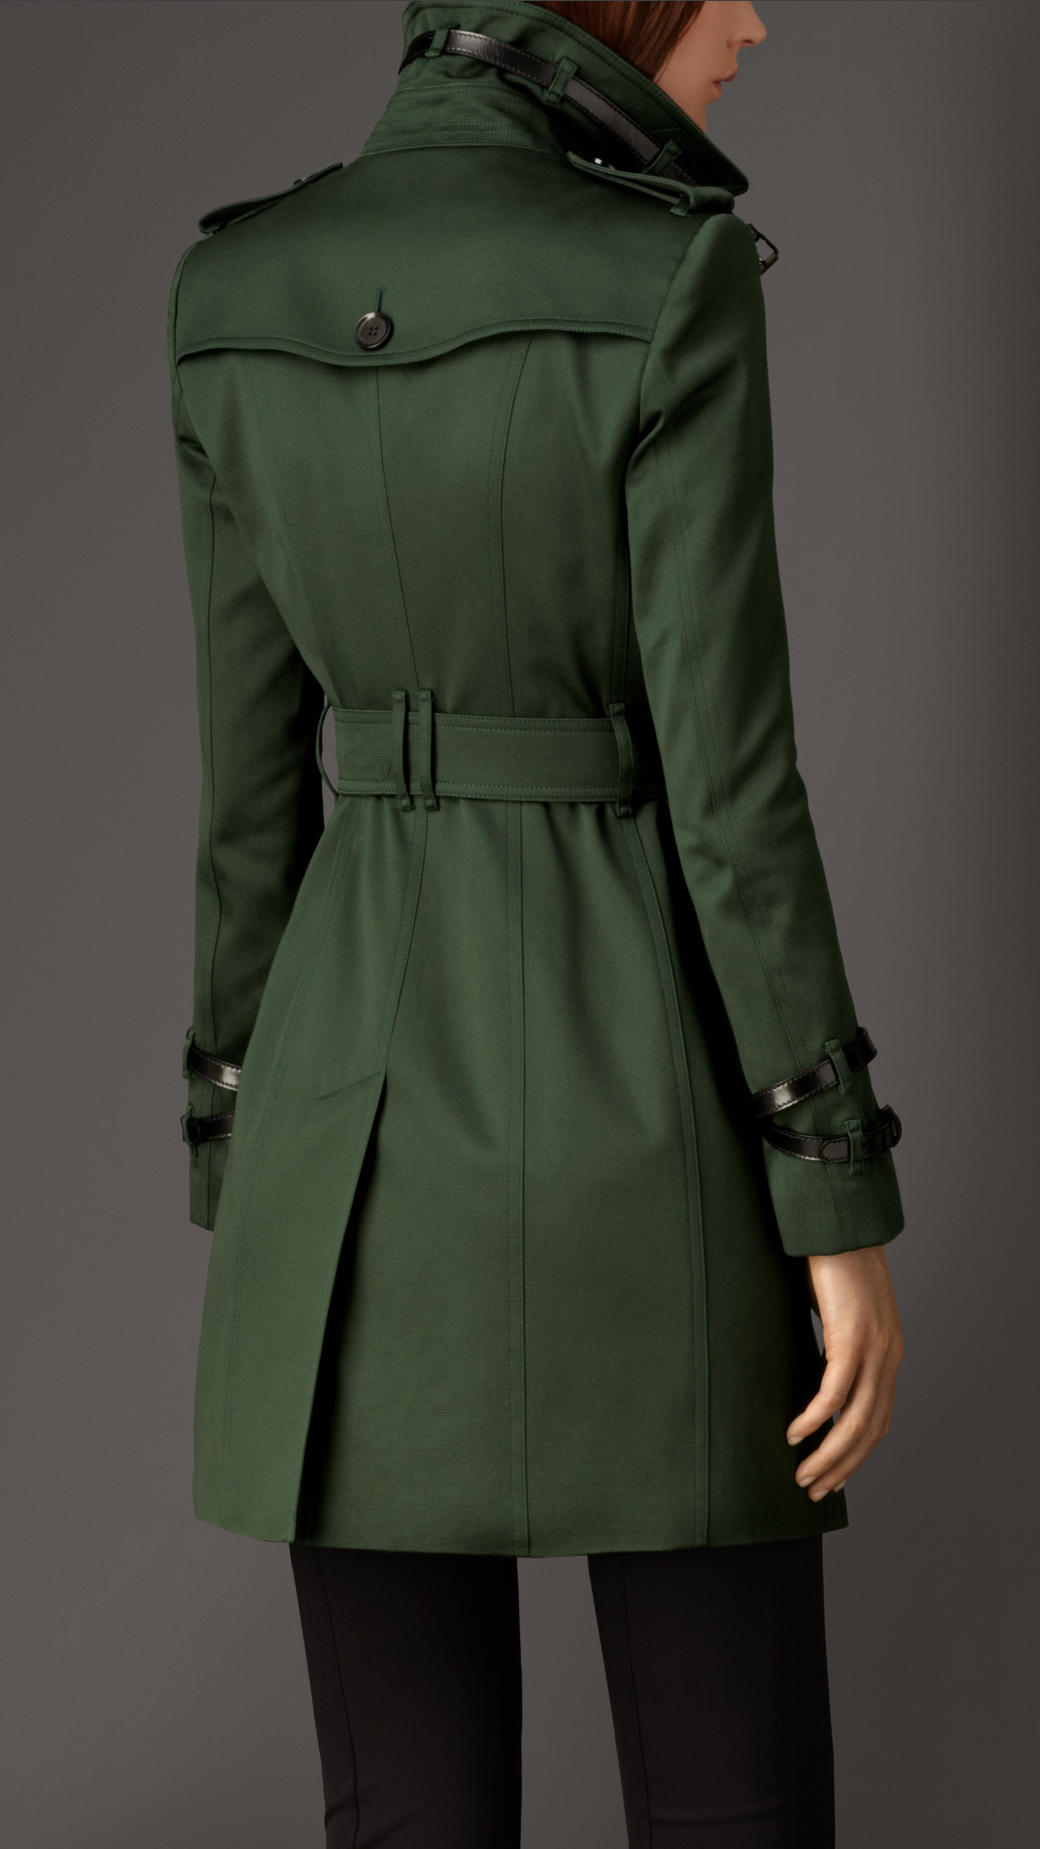 Burberry Mid-length Leather Detail Trench Coat in Dark Racing Green ...